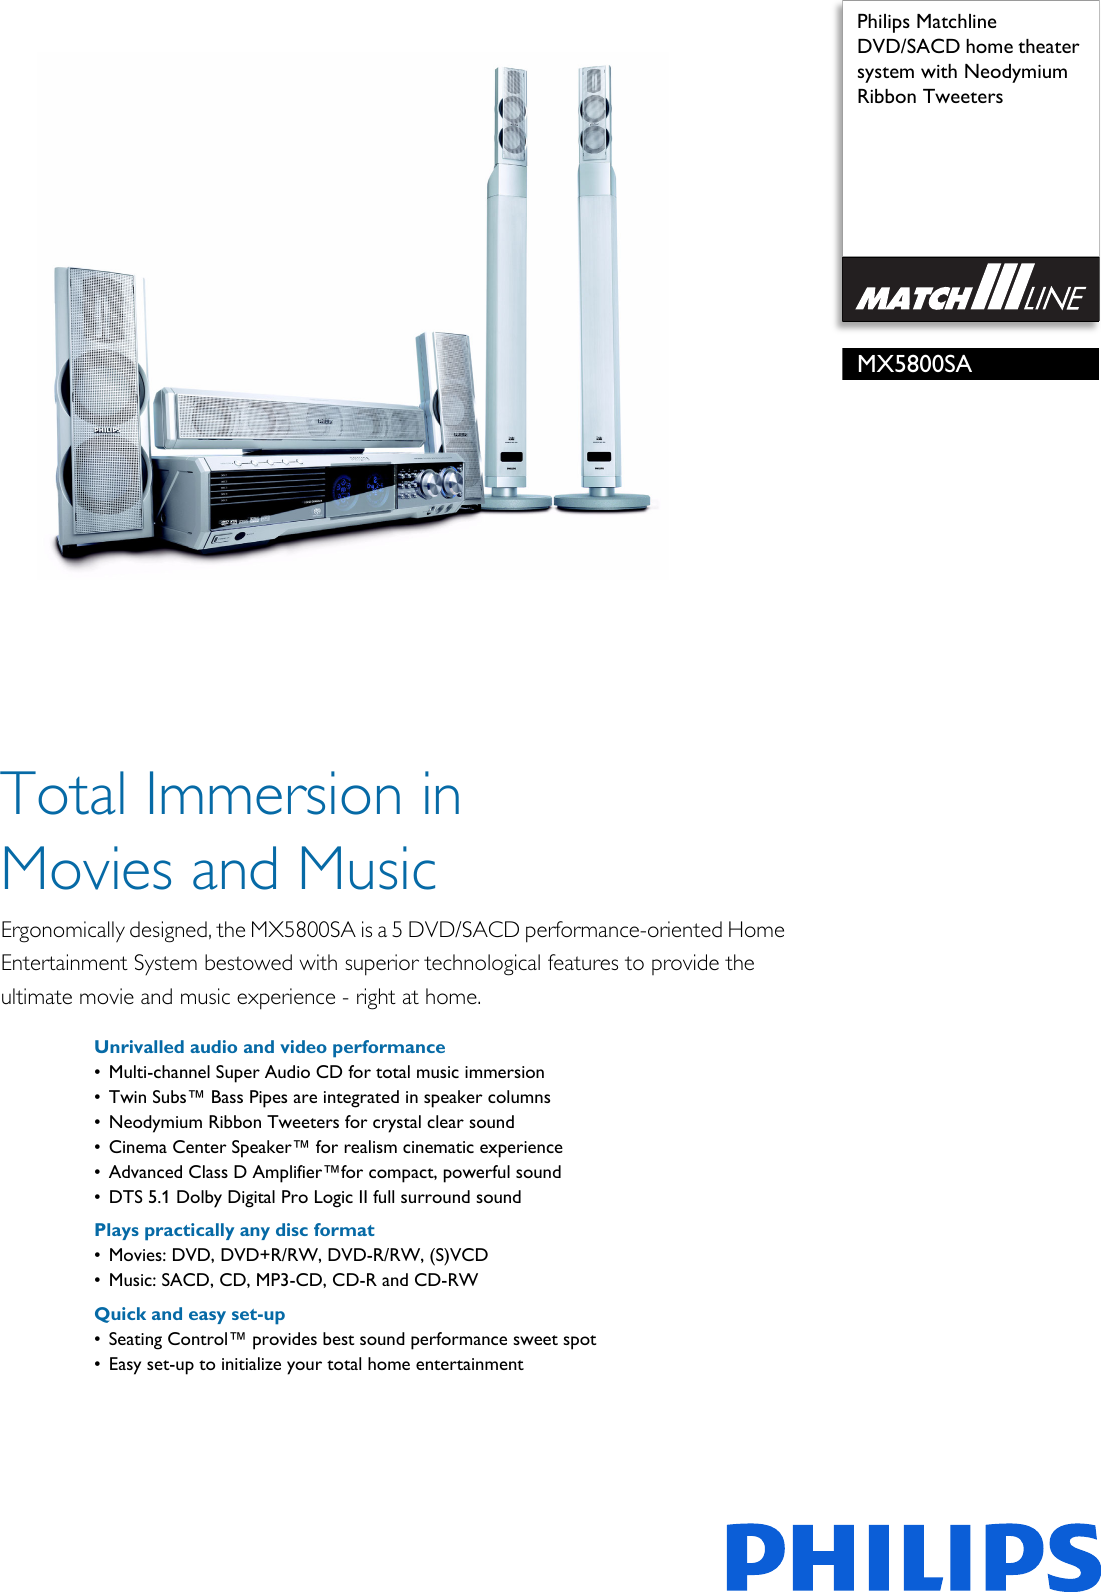 Page 1 of 3 - Philips MX5800SA/22S DVD/SACD Home Theater System With Neodymium Ribbon Tweeters Voldik Mx5800sa 22s Pss